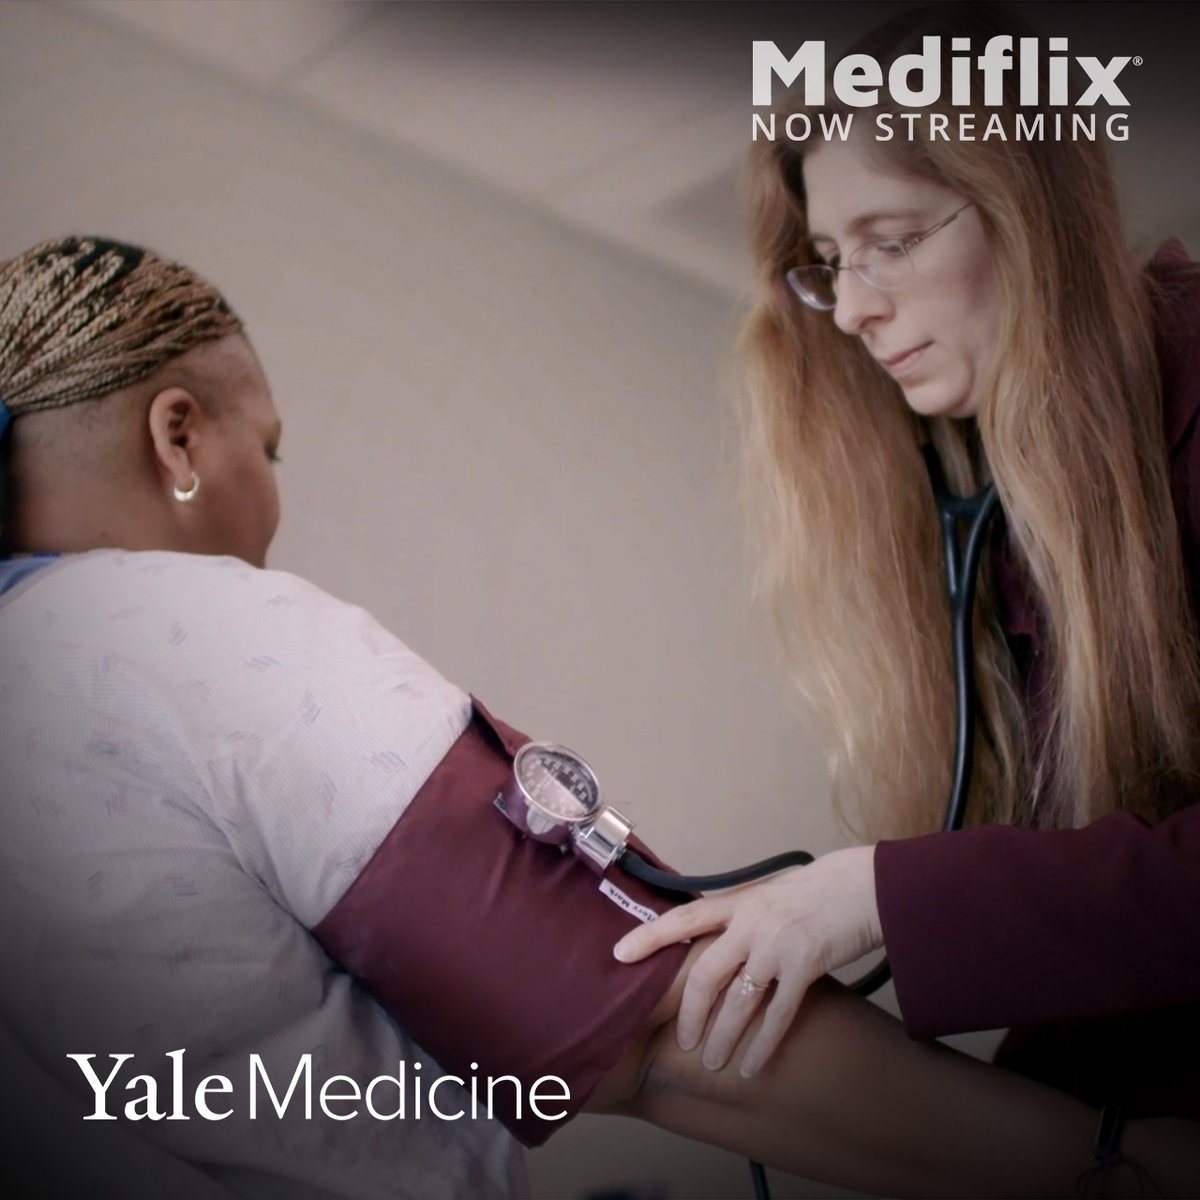 Did you know that more women than men die of heart attacks? Women are also more likely to have unique risk factors and symptoms for heart disease. During #NationalWomensHealthMonth, learn from @YaleMedicine: bit.ly/3WEtZl7

#Mediflix #AmericanStrokeMonth #HeartHealth